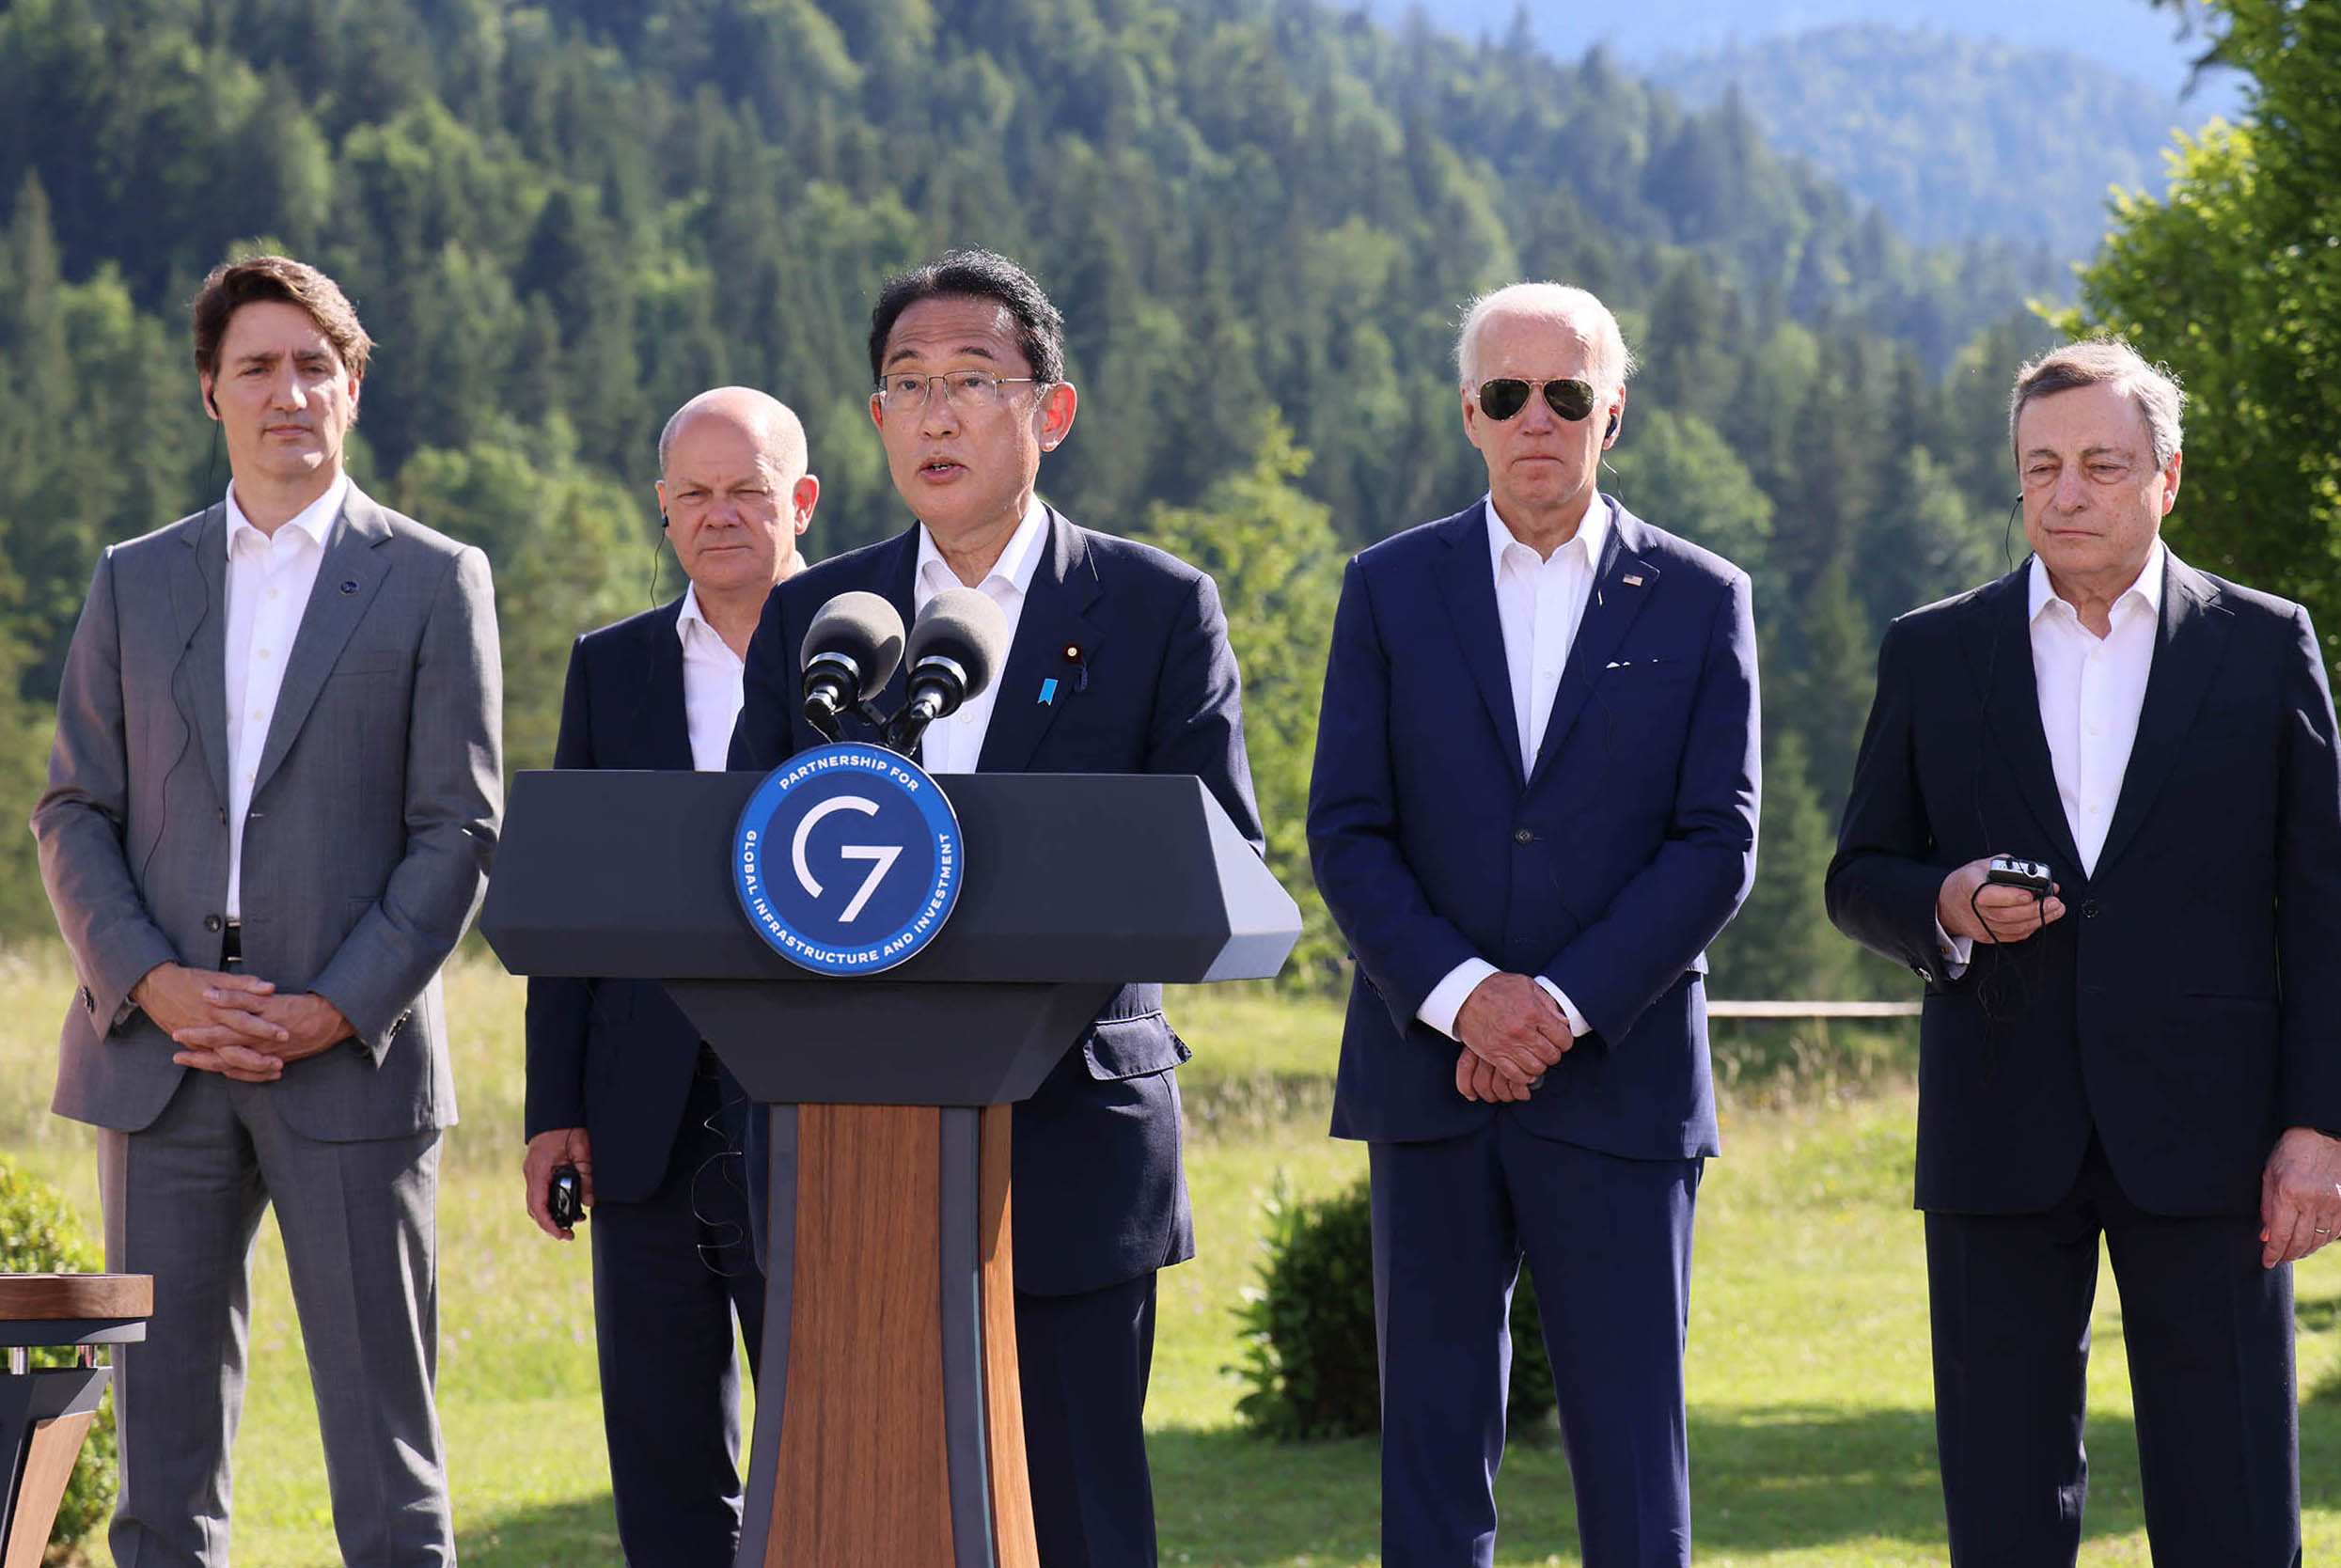 Prime Minister Fumio Kishida of Japan announces additional sanctions on Russia during the G7 Schloss Elmau Summit, June 2022.